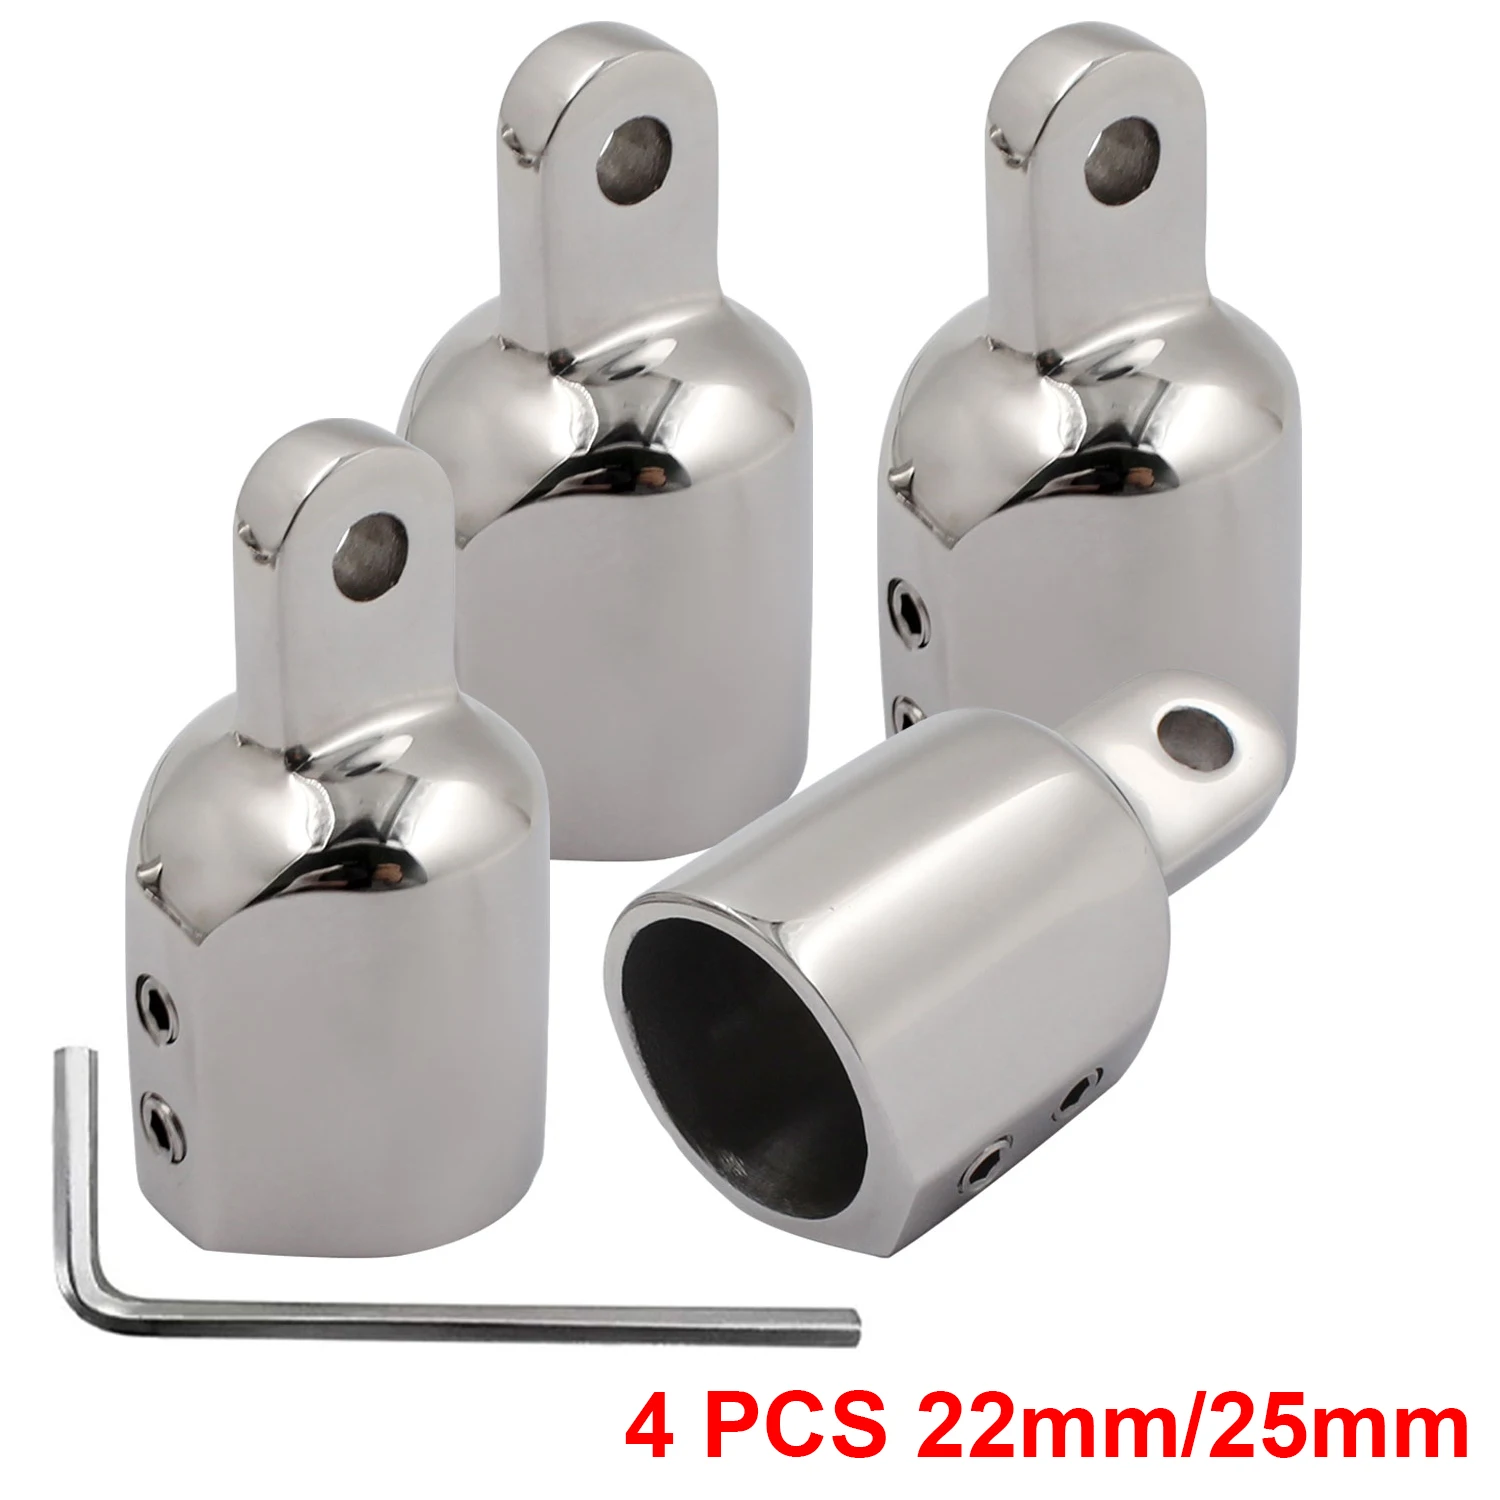 4 Pack 22mm/25mm Heavy Duty Bimini Top Cap Eye End Fitting Stainless Steel 316 Marine Hardware Boat External Eye End 4pcs bimini top slides boat bimini top fitting cover jaw slide fittings yacht accessories marine bimini fitting hardware